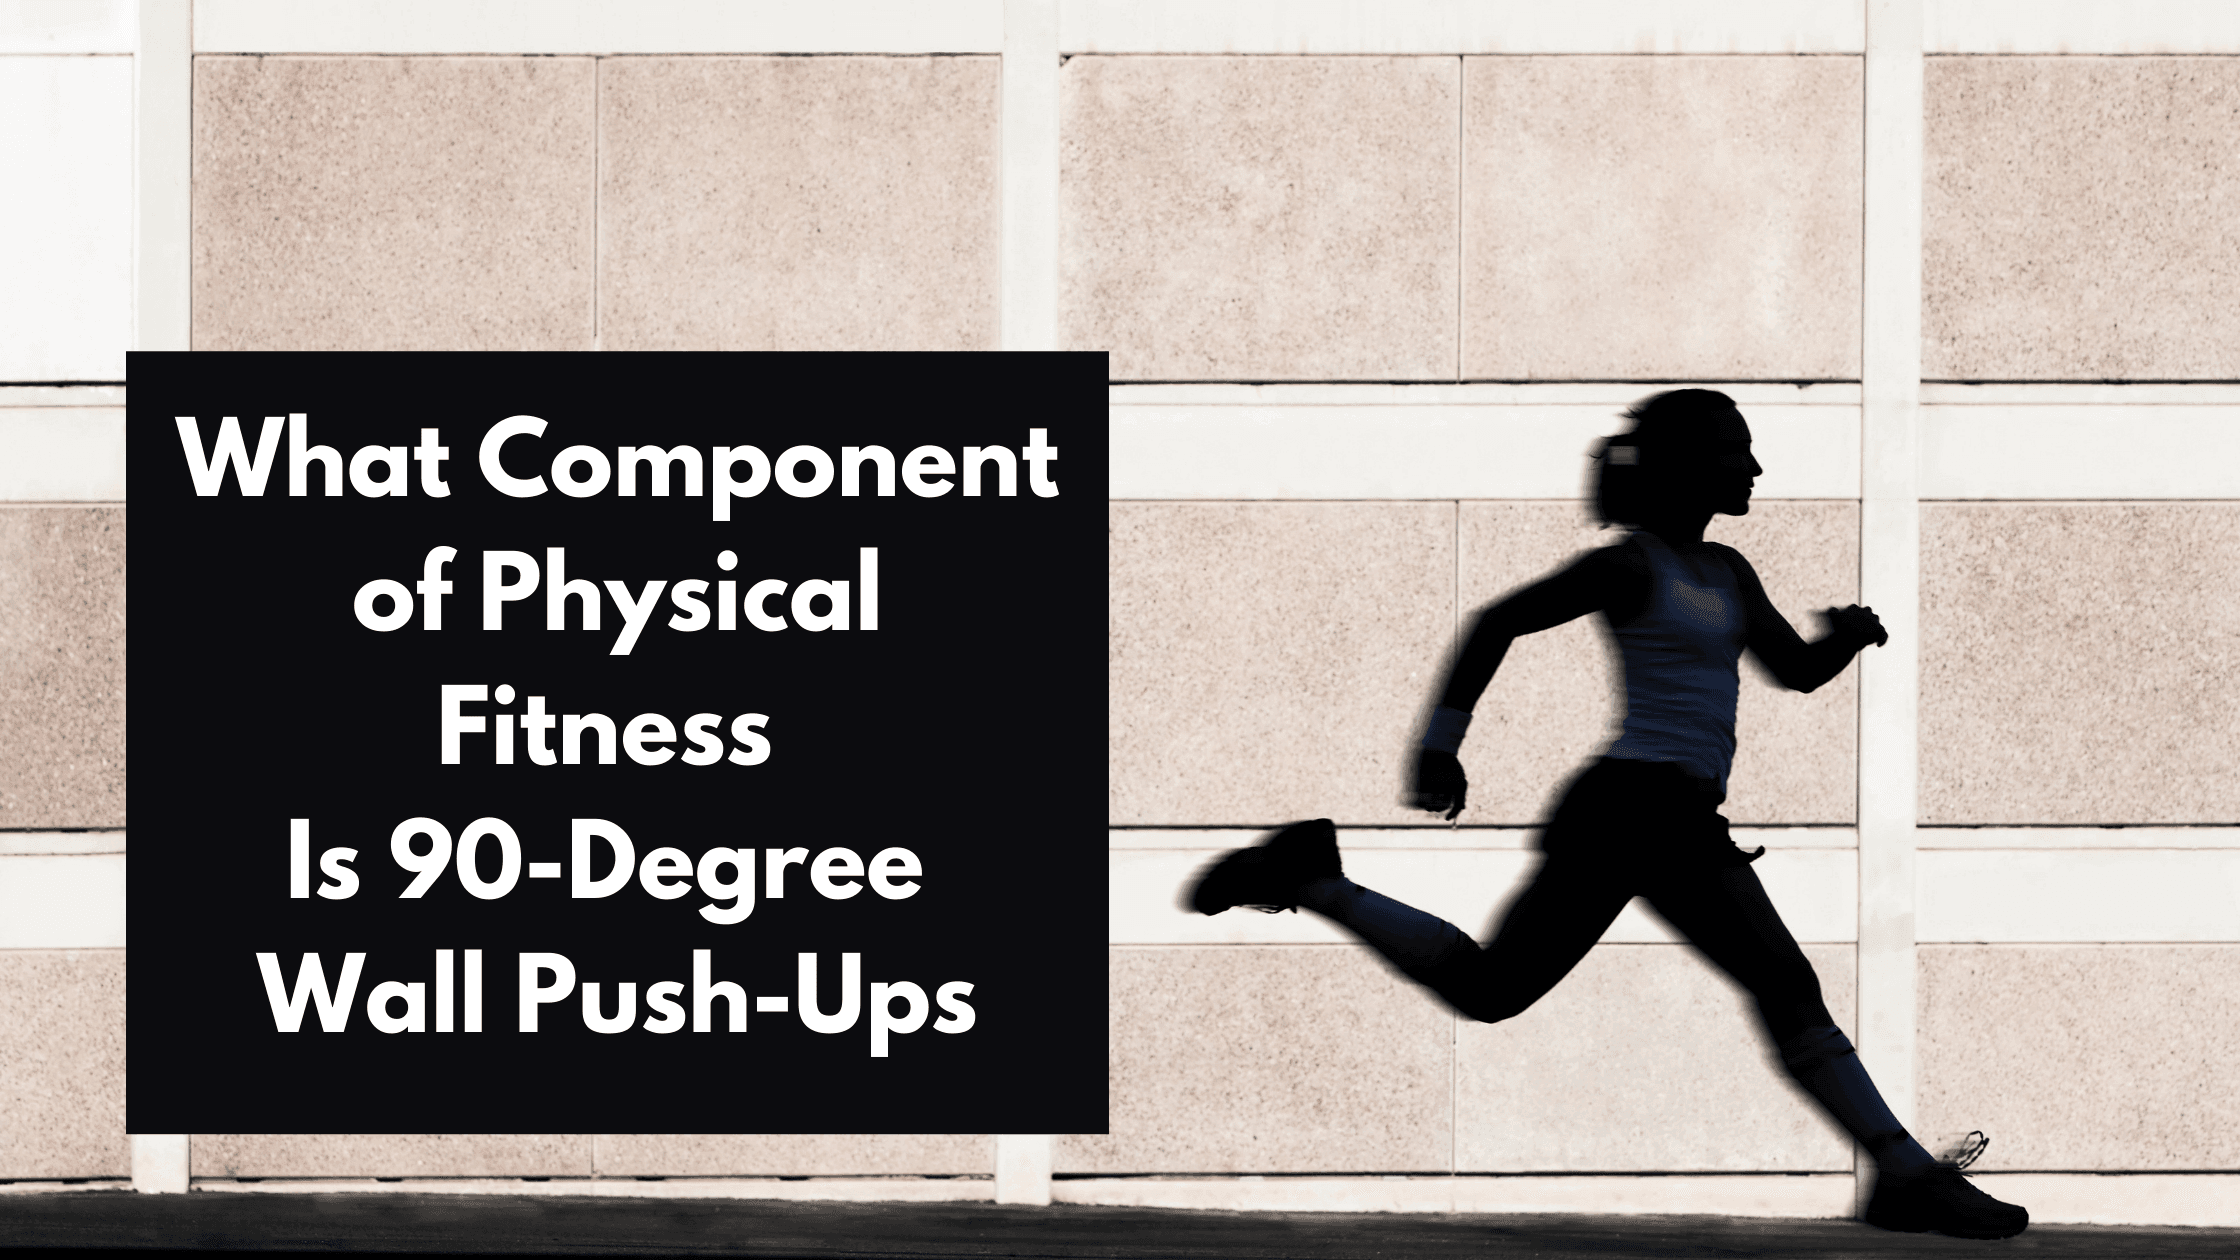 What Component of Physical Fitness Is 90-Degree Wall Push-Ups